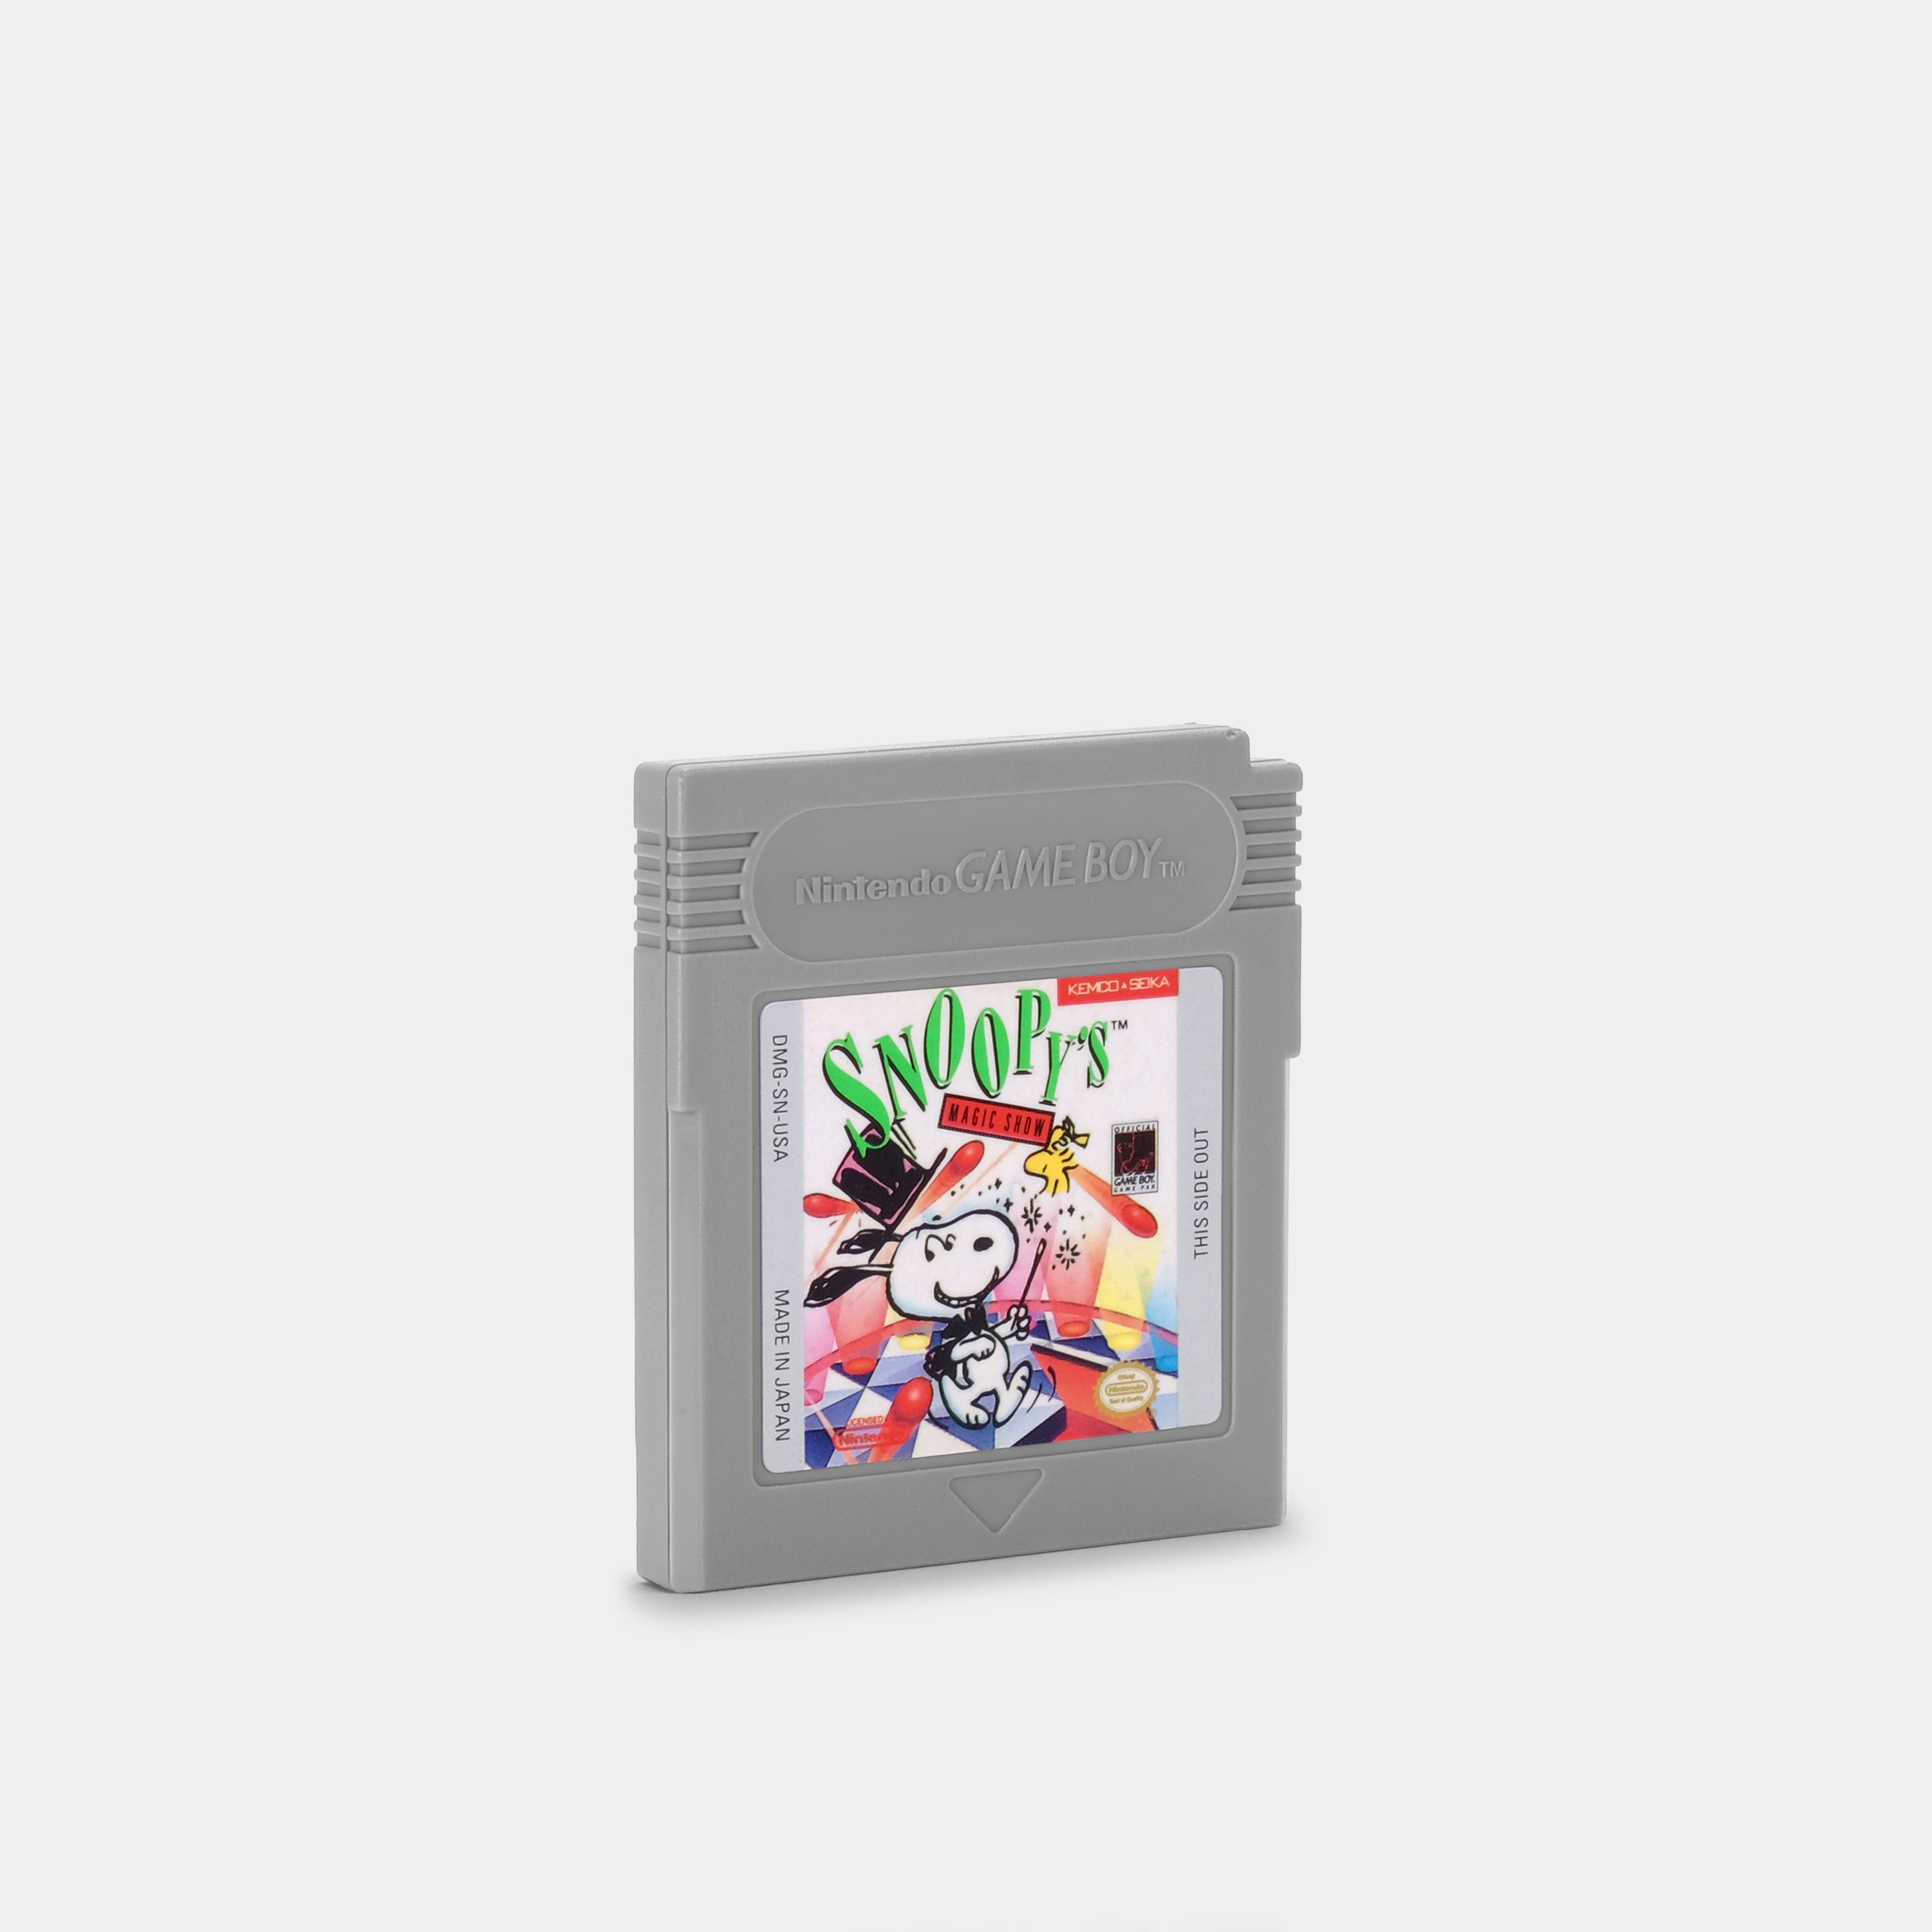 Snoopy's Magic Show Game Boy Game